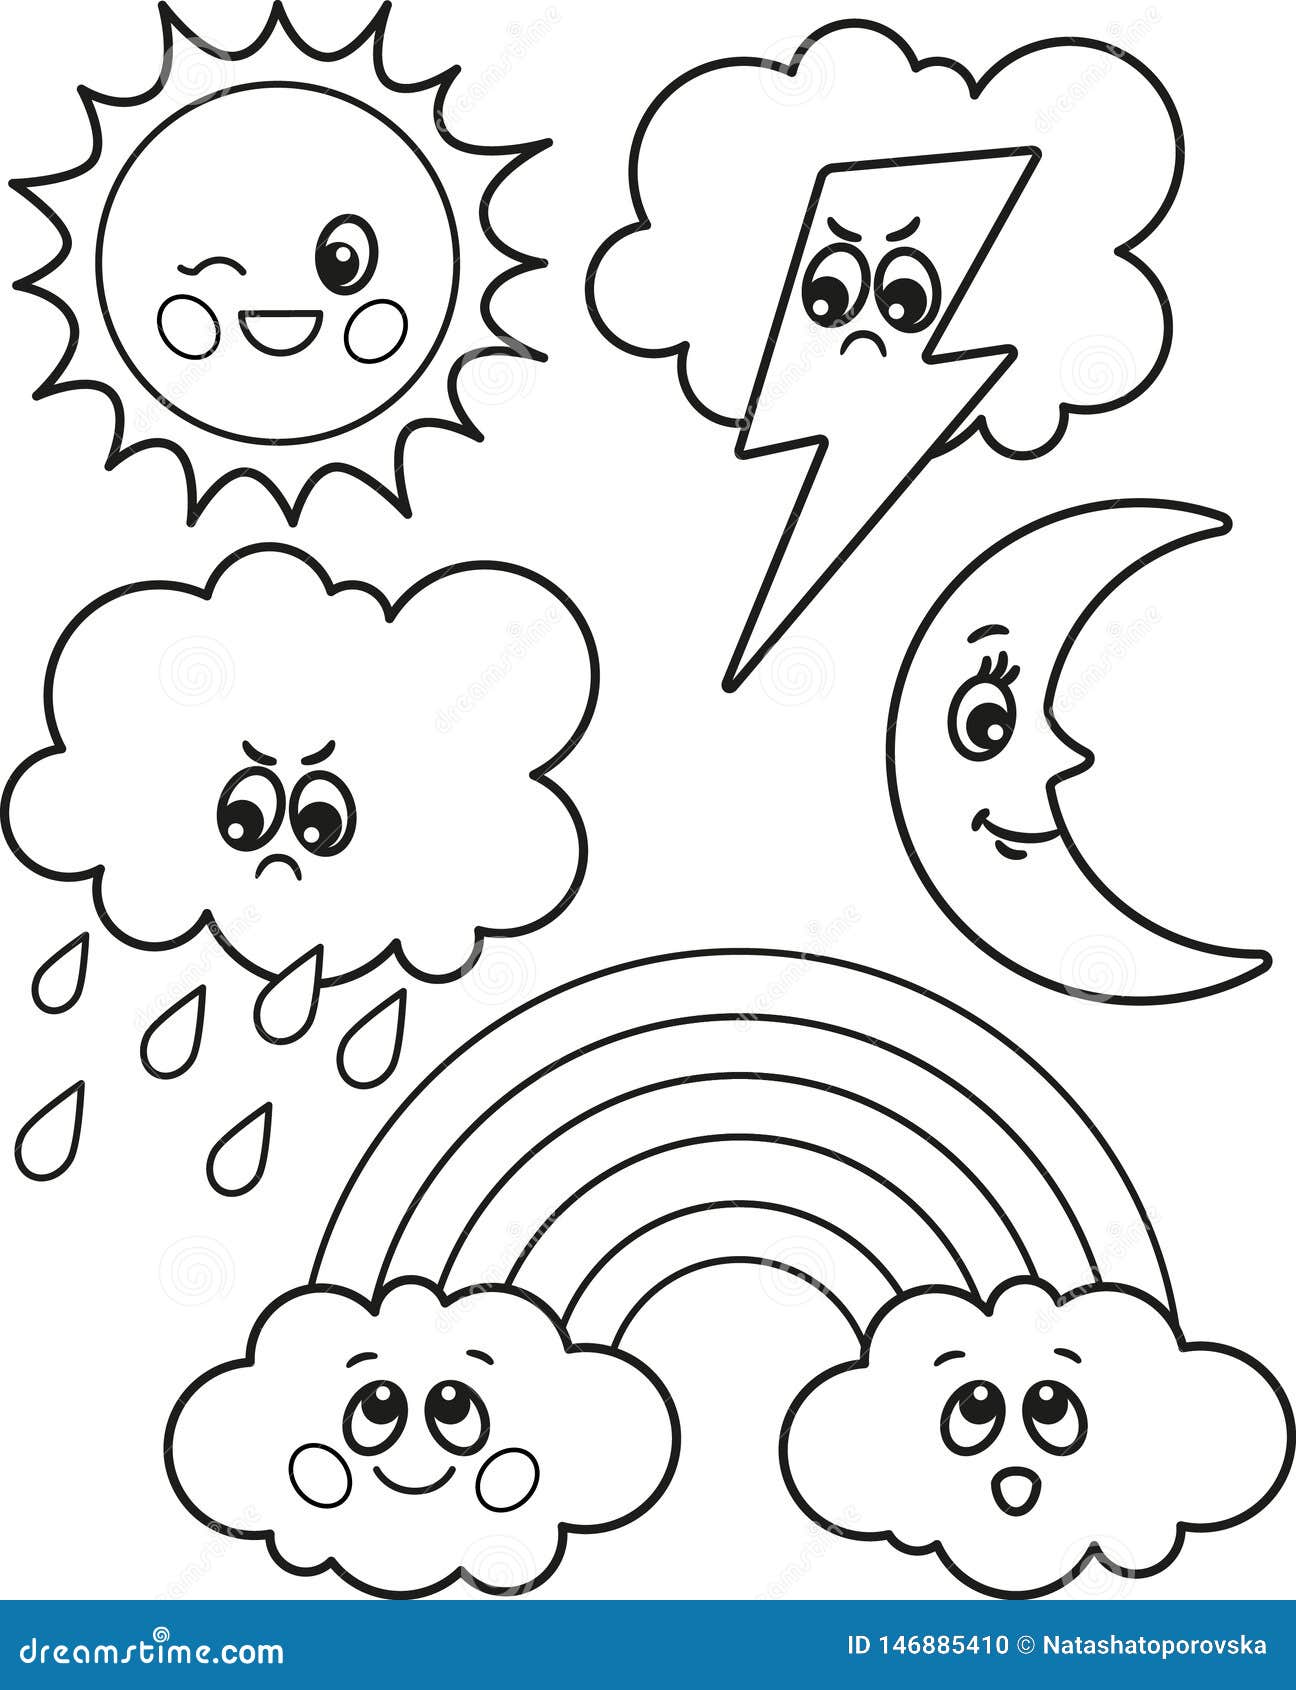 Cute Set Of Cartoon Weather Icons, Vector Black And White Icons